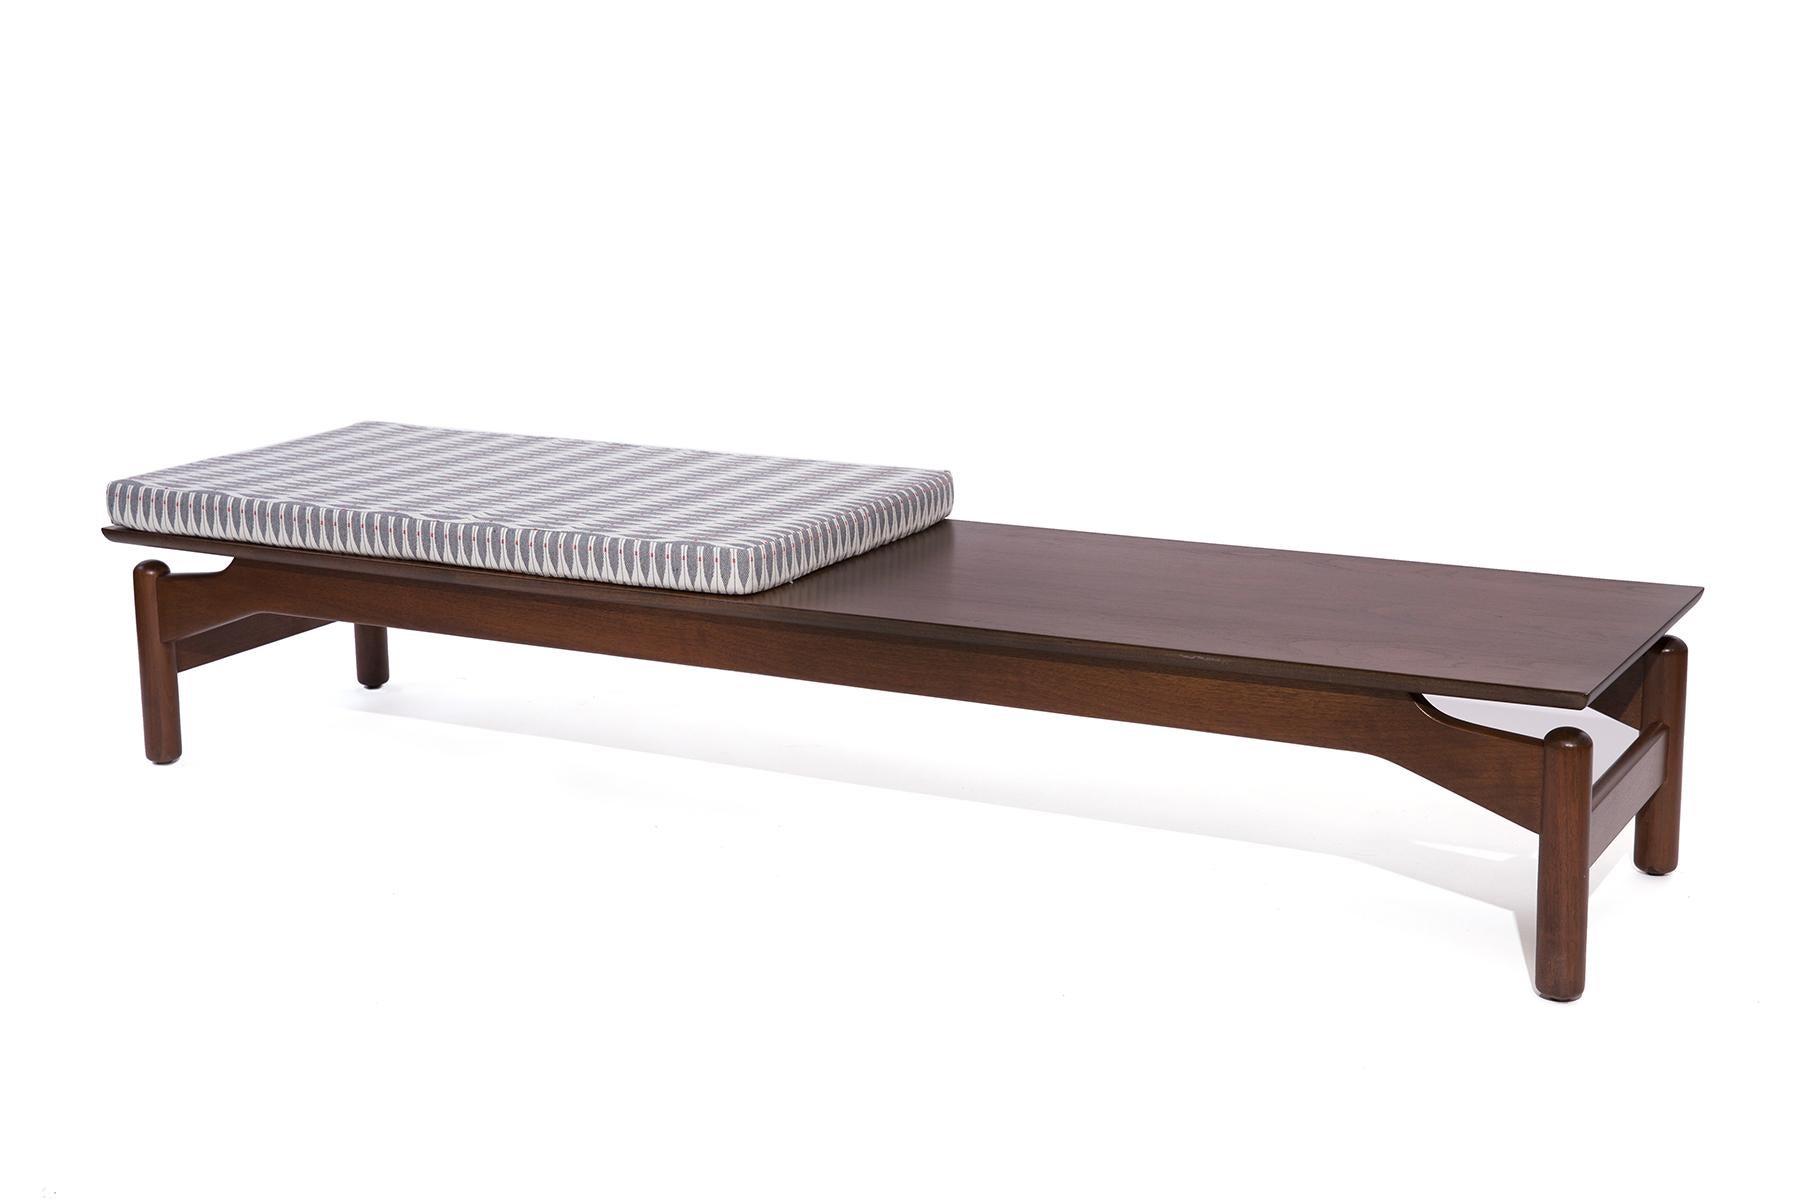 Greta Grossman for Glenn of California walnut and upholstered bench or coffee table, circa early 1960s. This example has been newly finished and newly upholstered in a light grey pattern.